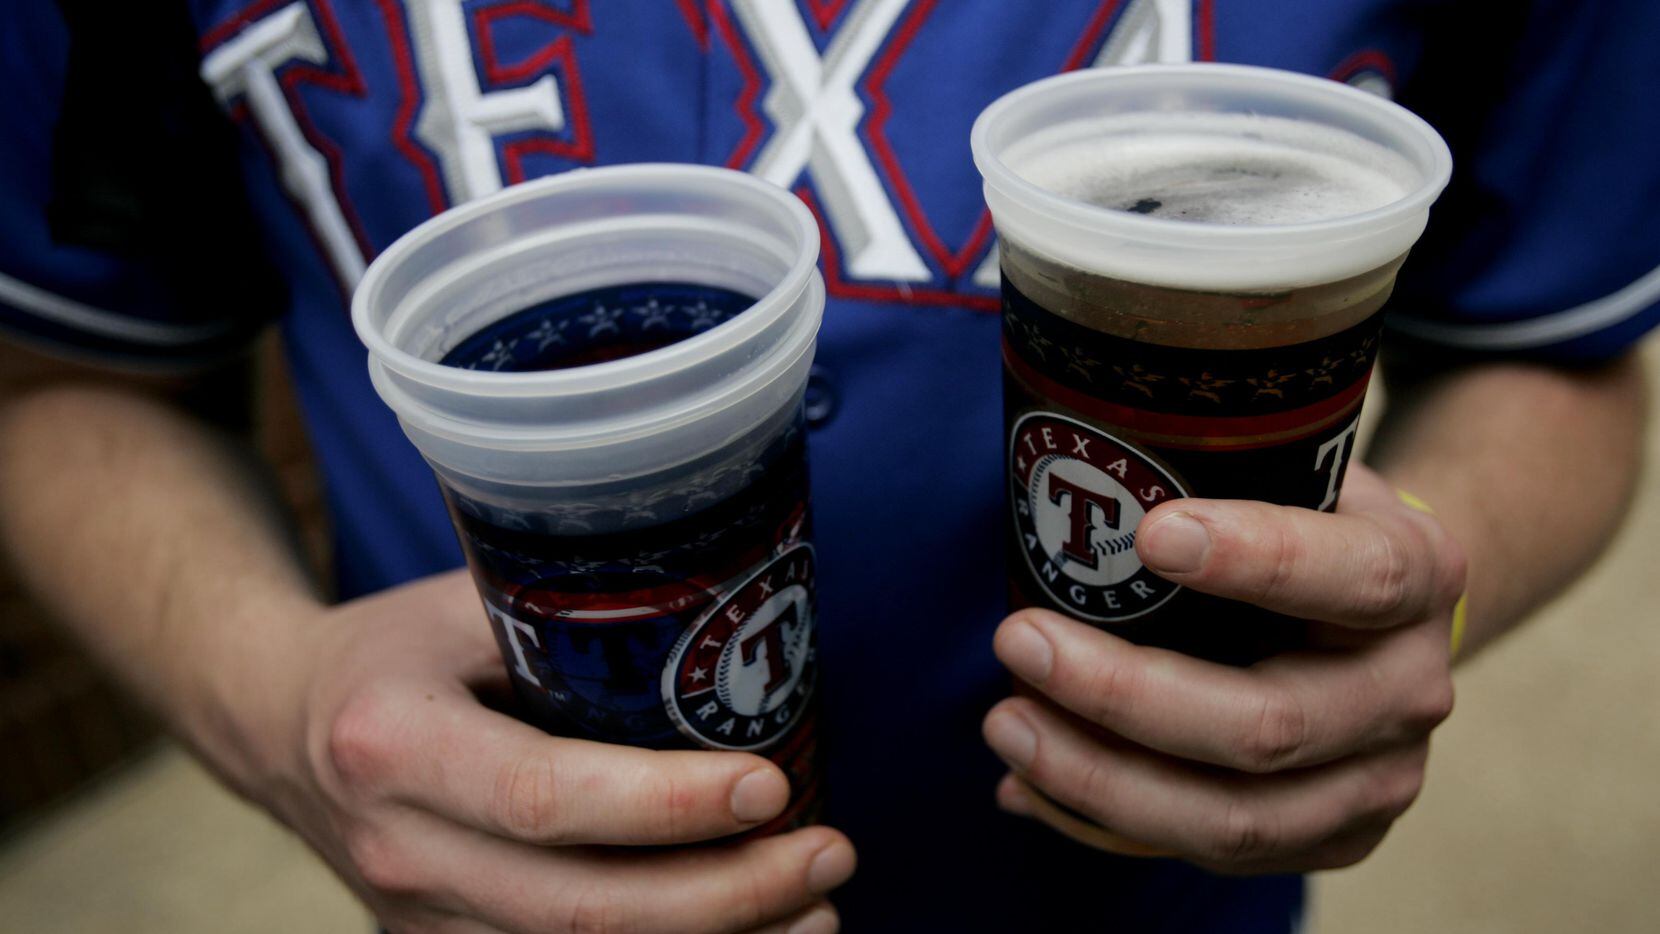 Texas Rangers boast some of the cheapest beer in baseball